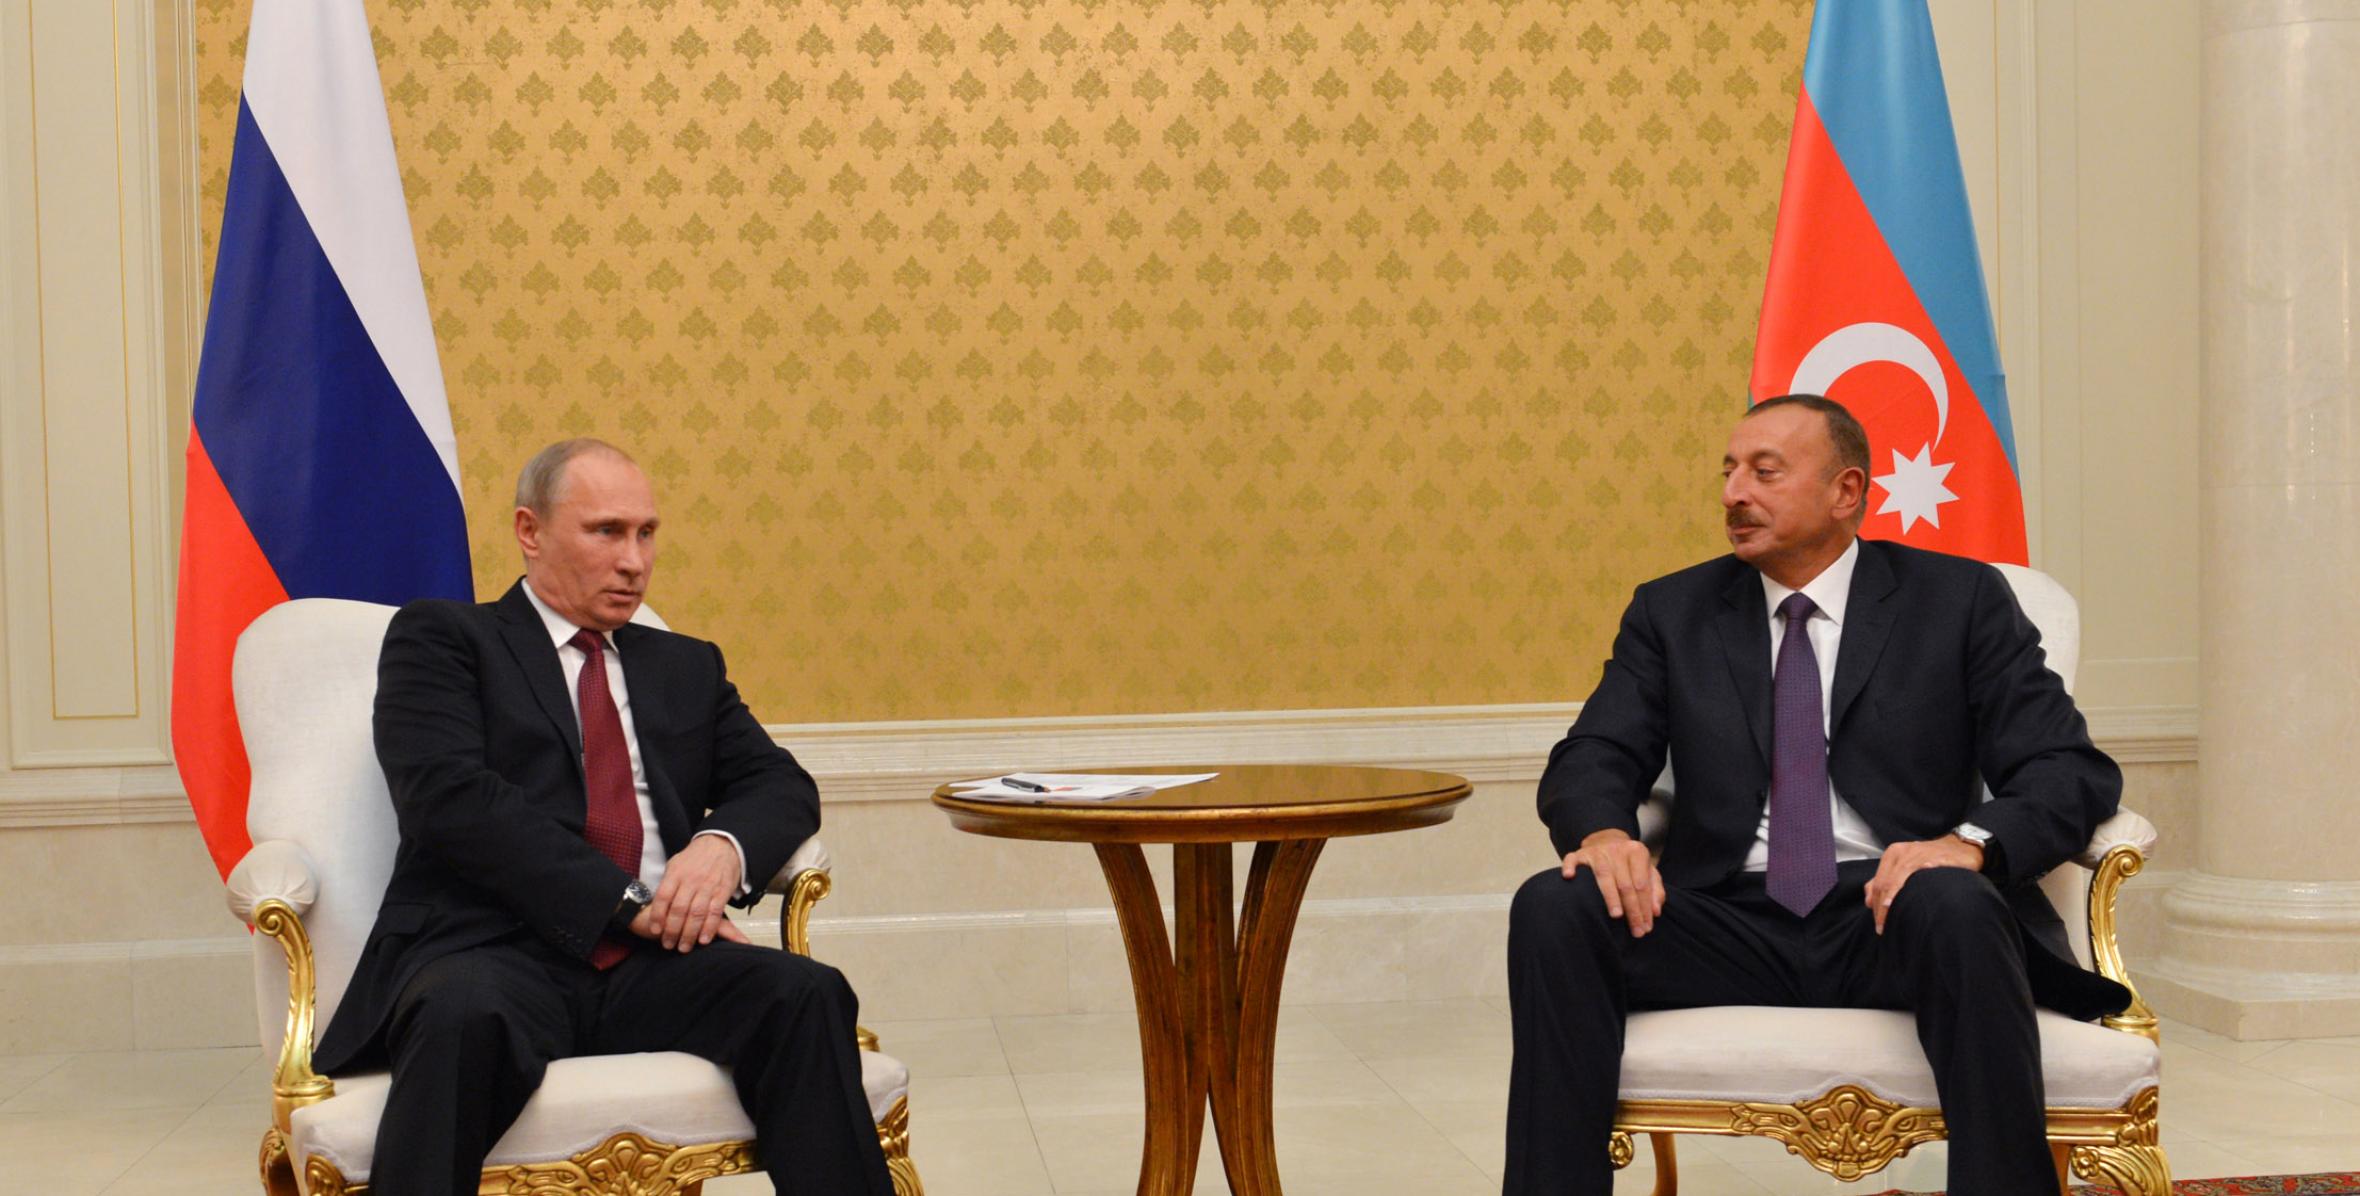 Ilham Aliyev and President of Russia Vladimir Putin held a one-on-one meeting